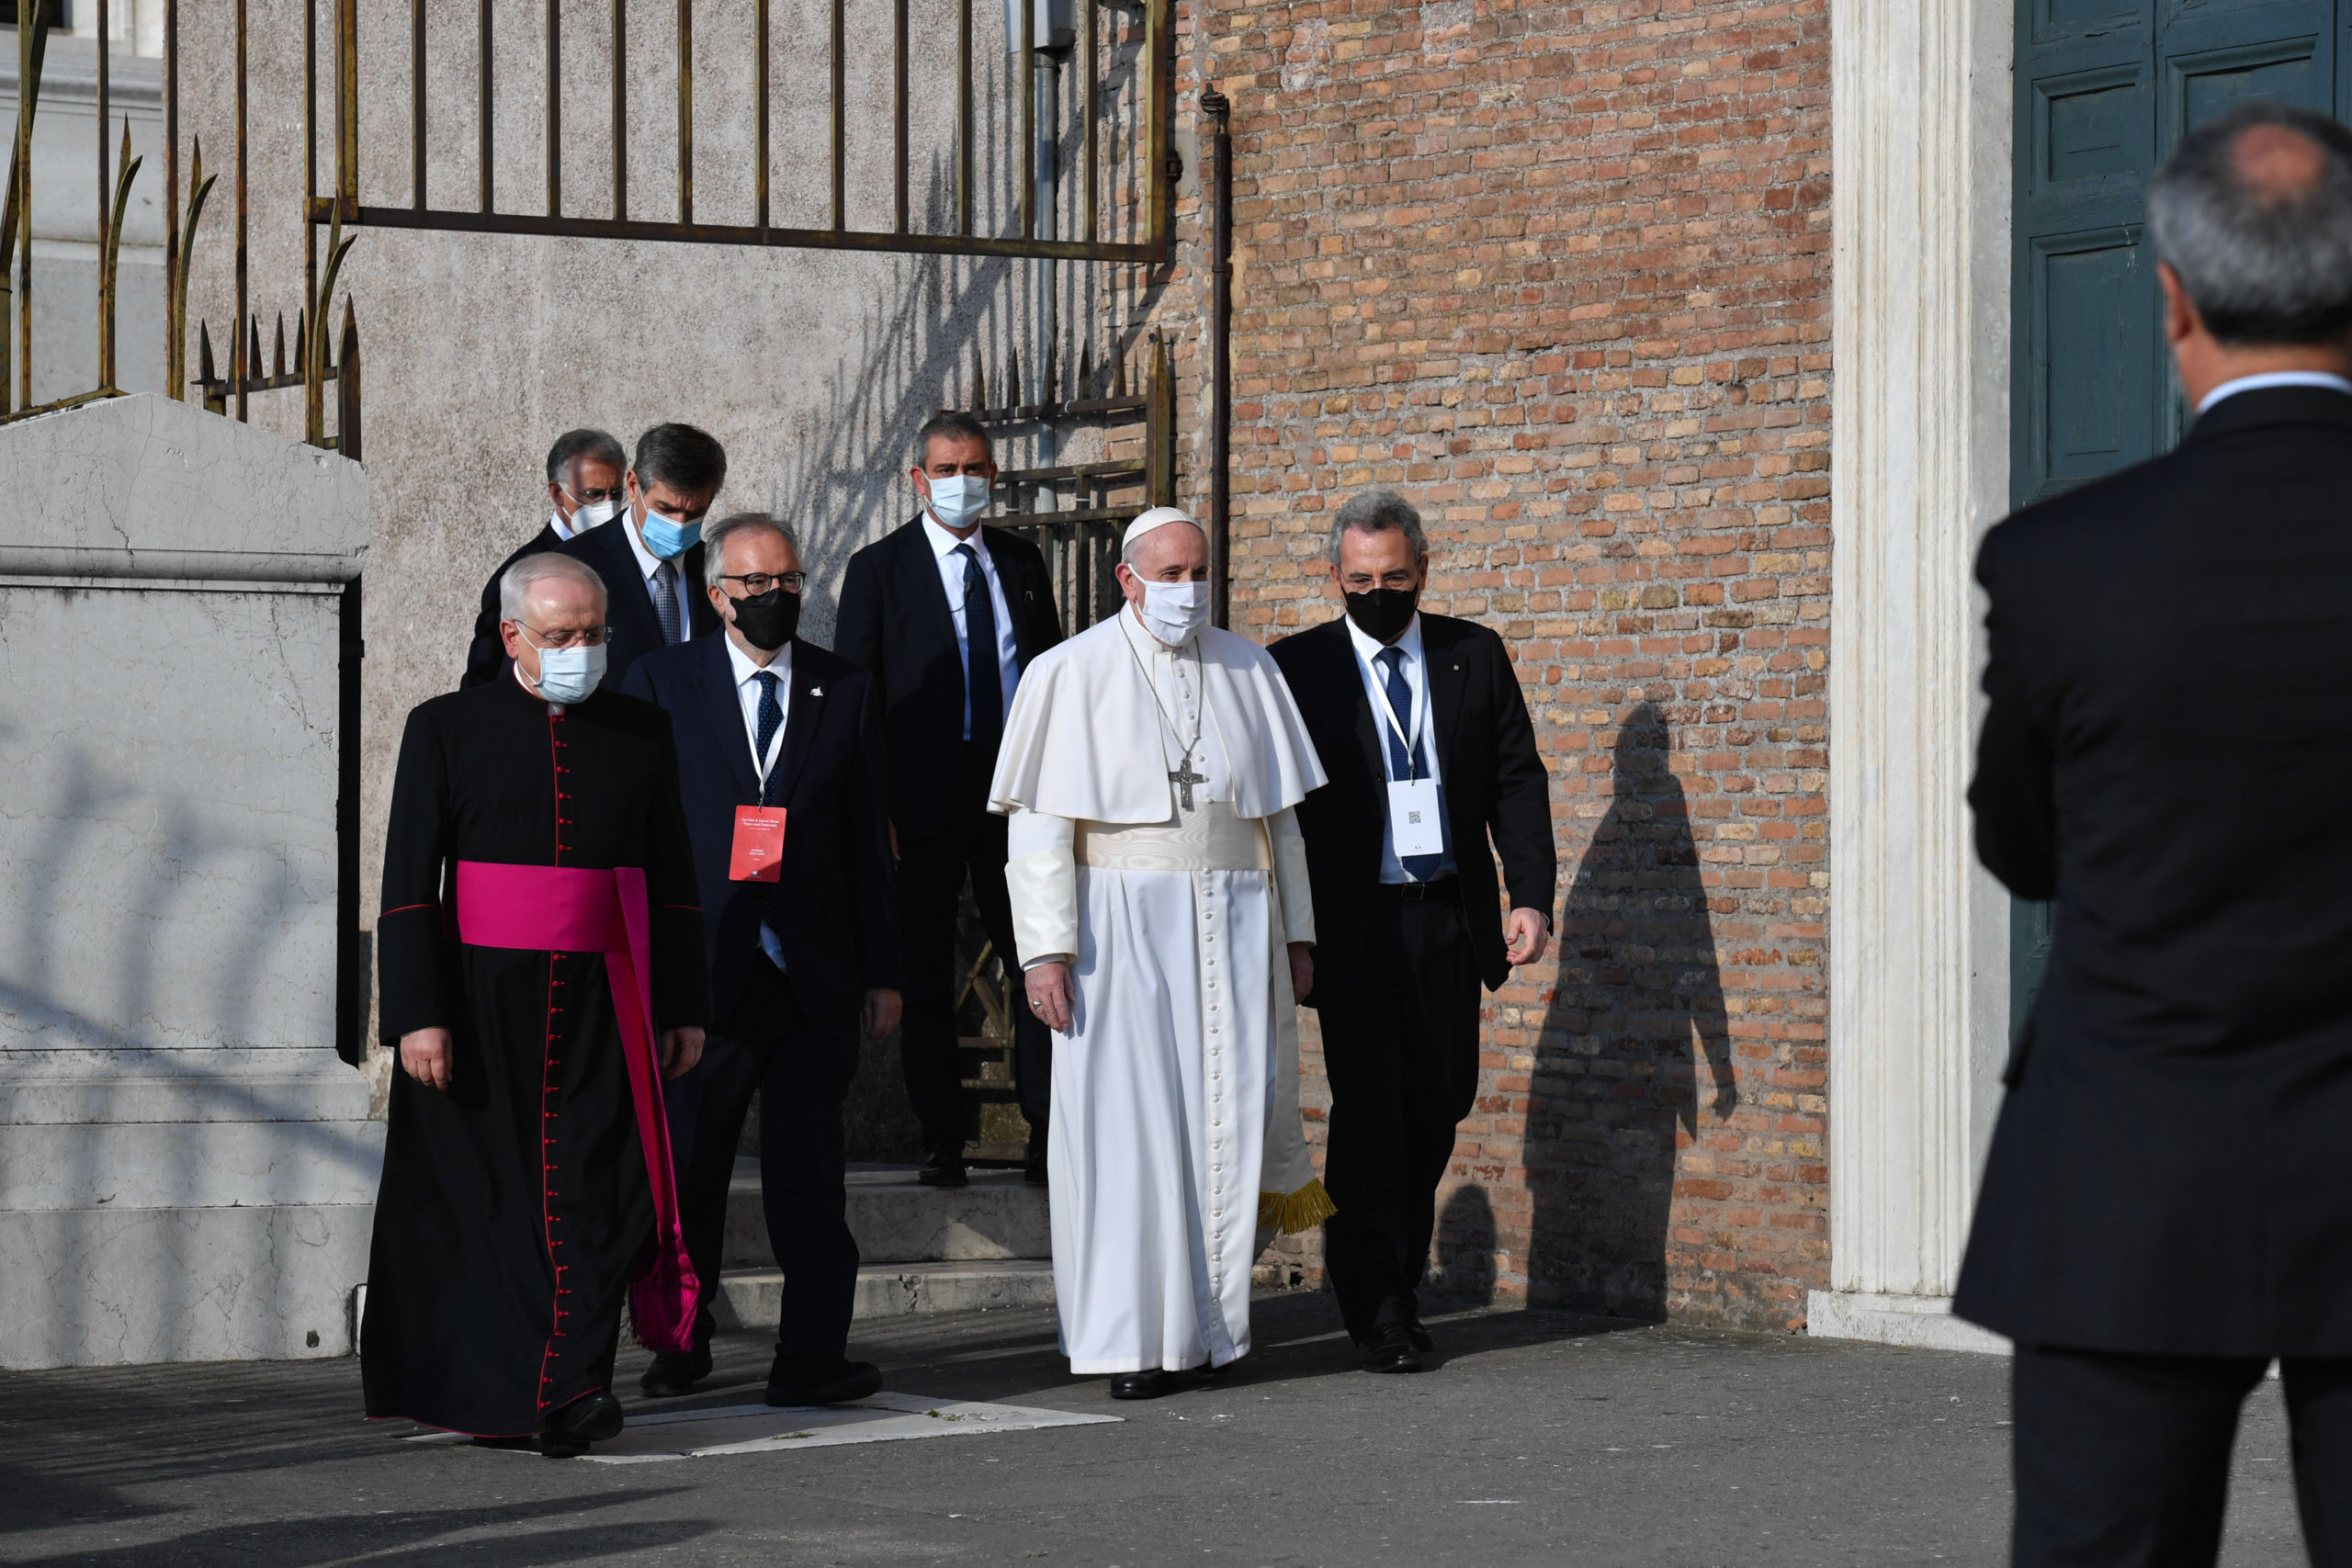 EXCLUSIVE INTERVIEW: As Pope to Participate Amid Pandemic in Sant’Egidio Encounter, Community’s President Marco Impagliazzo Says ‘Prayer Is at Root of Peace’